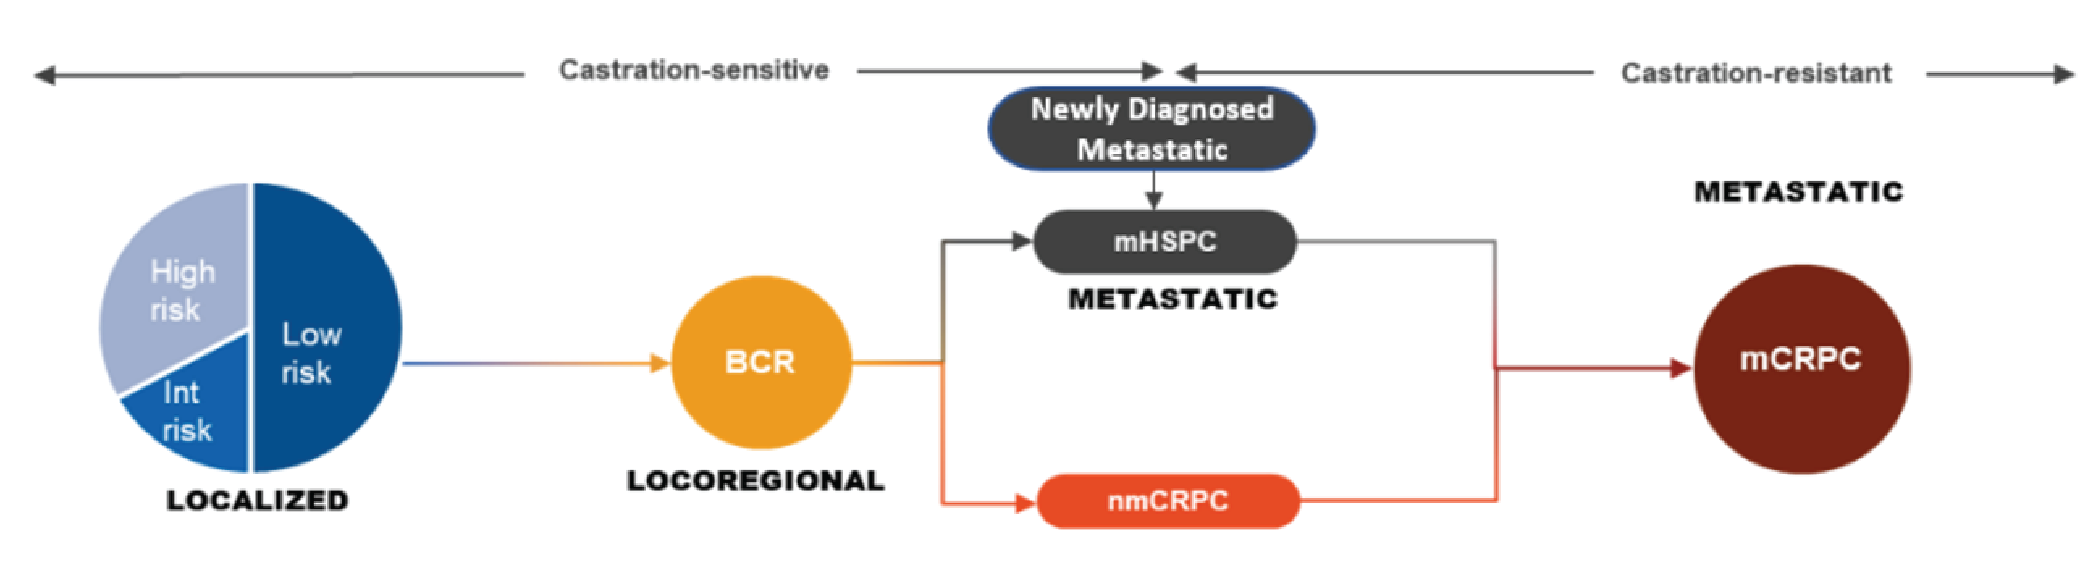 Progression of prostate cancer from localized disease to metastatic castration-resitant disease.